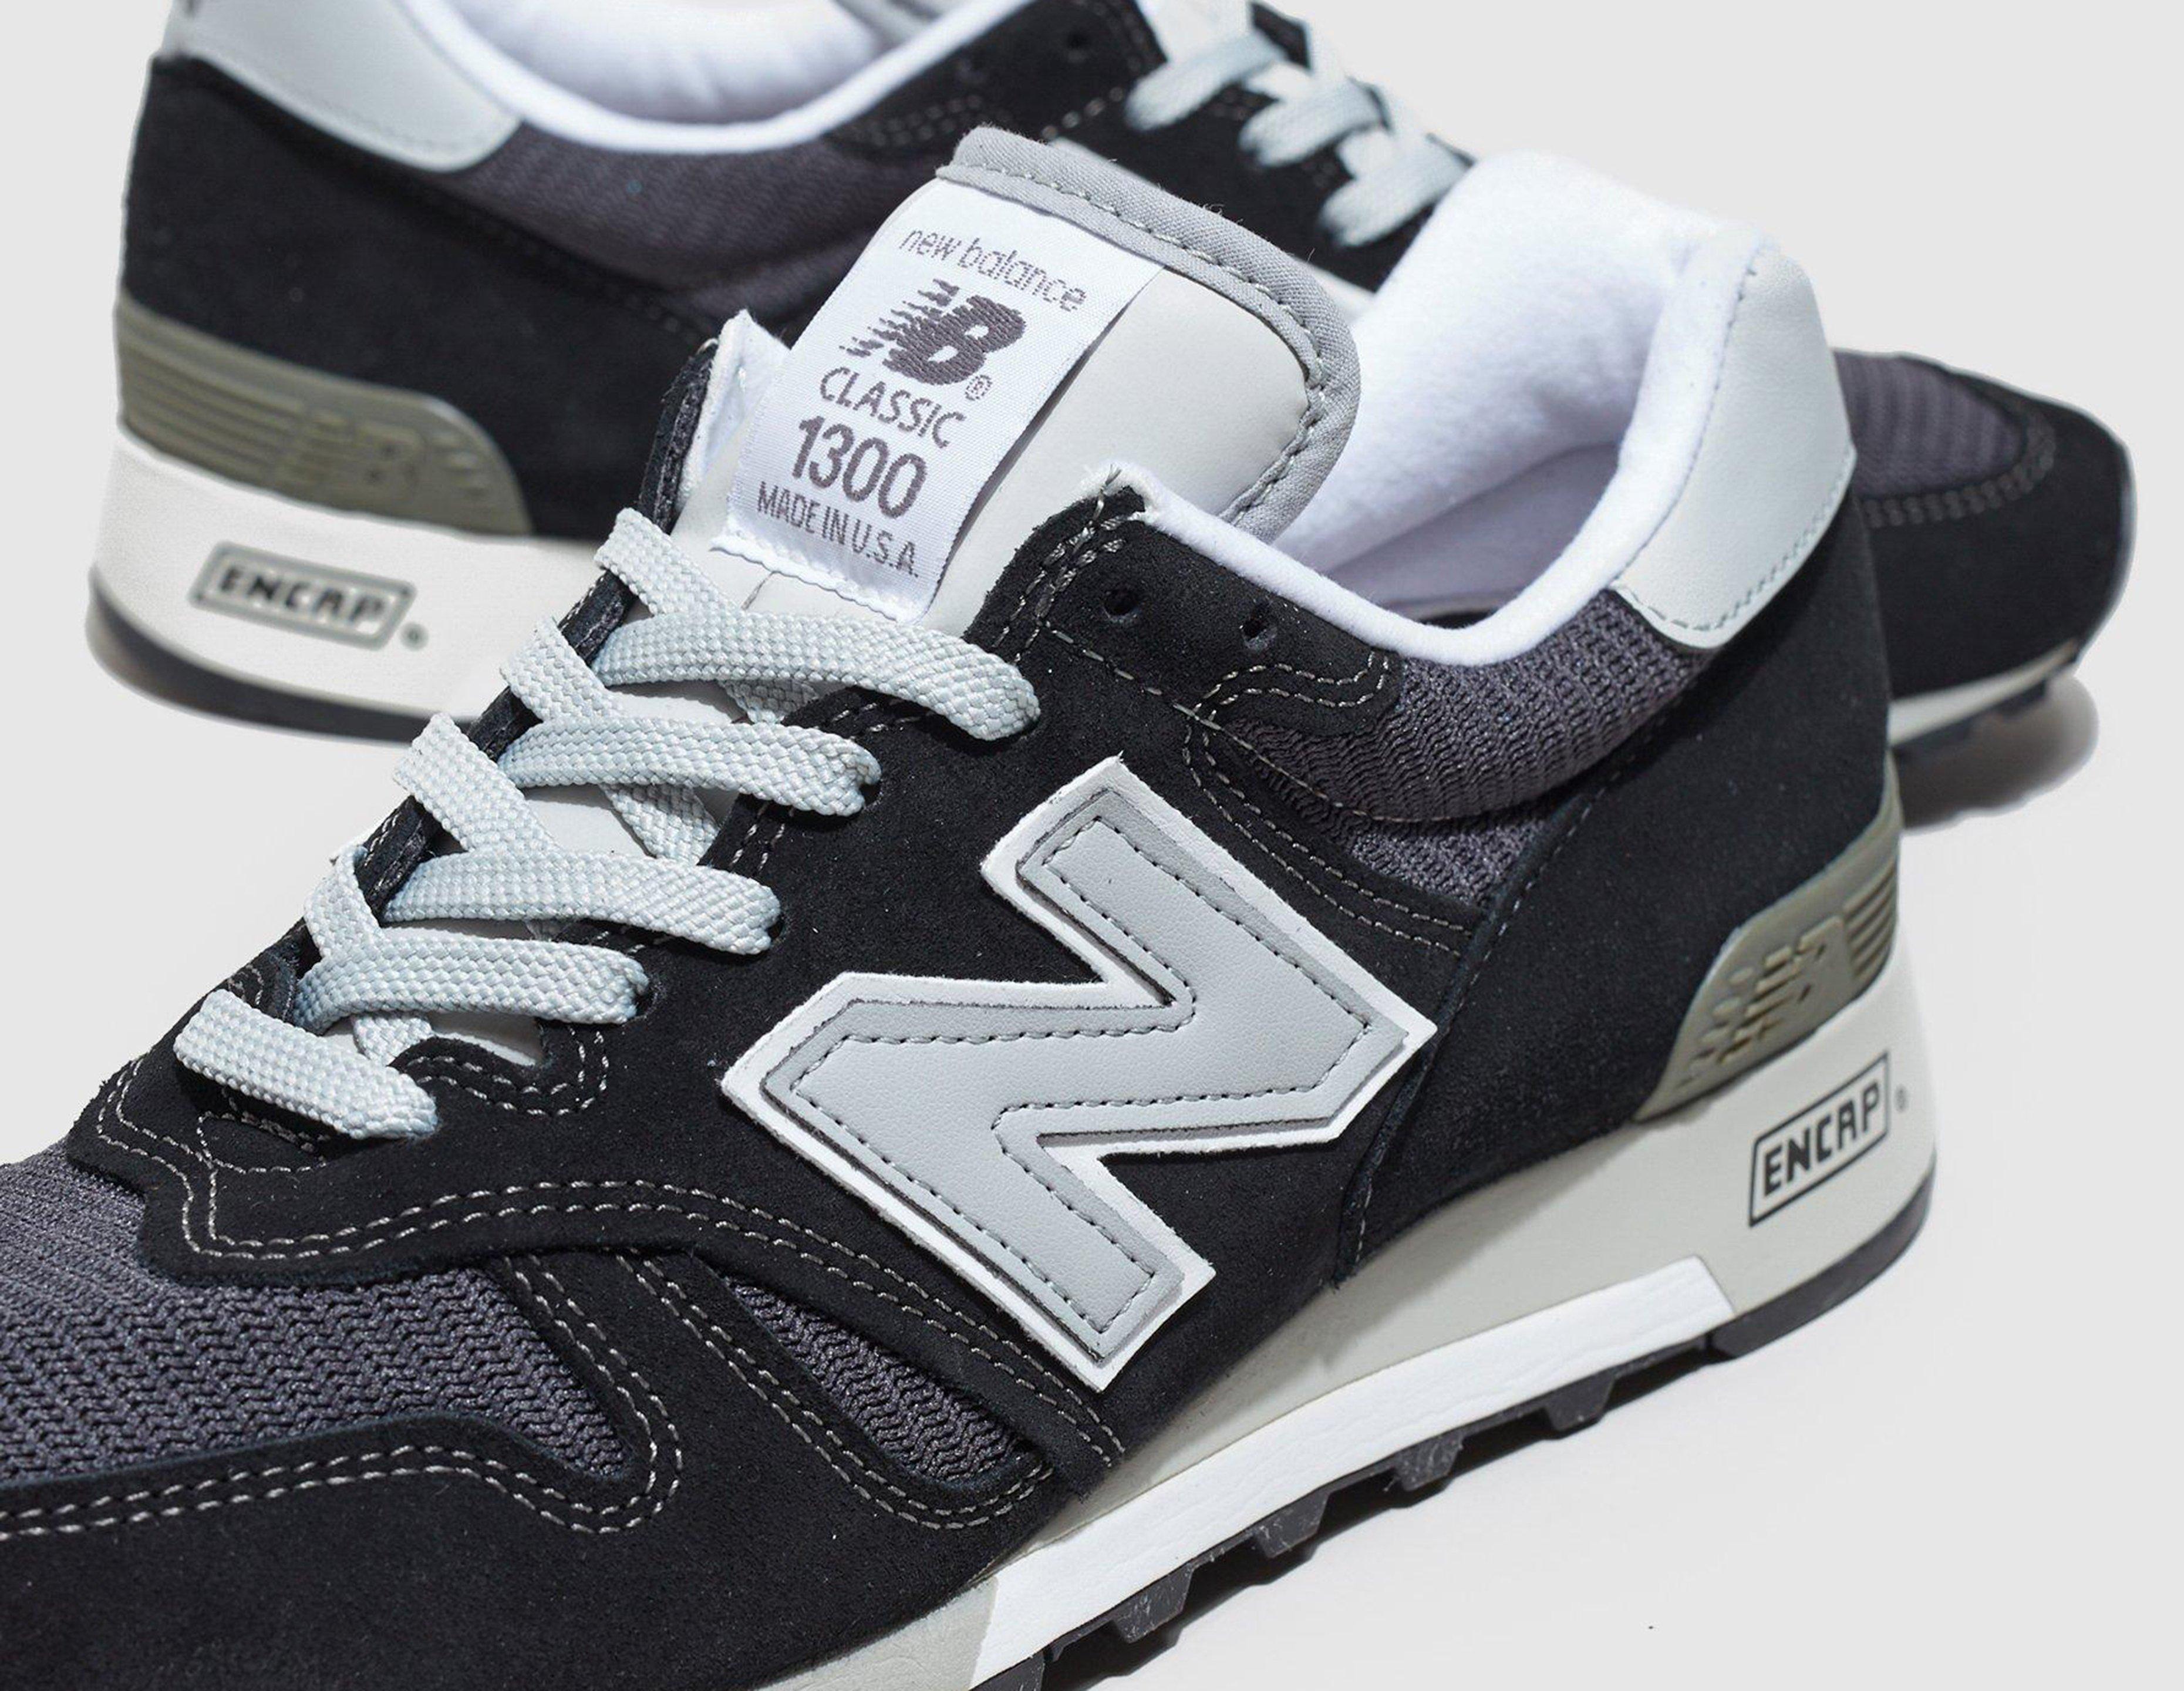 new balance classic 1300 made in usa